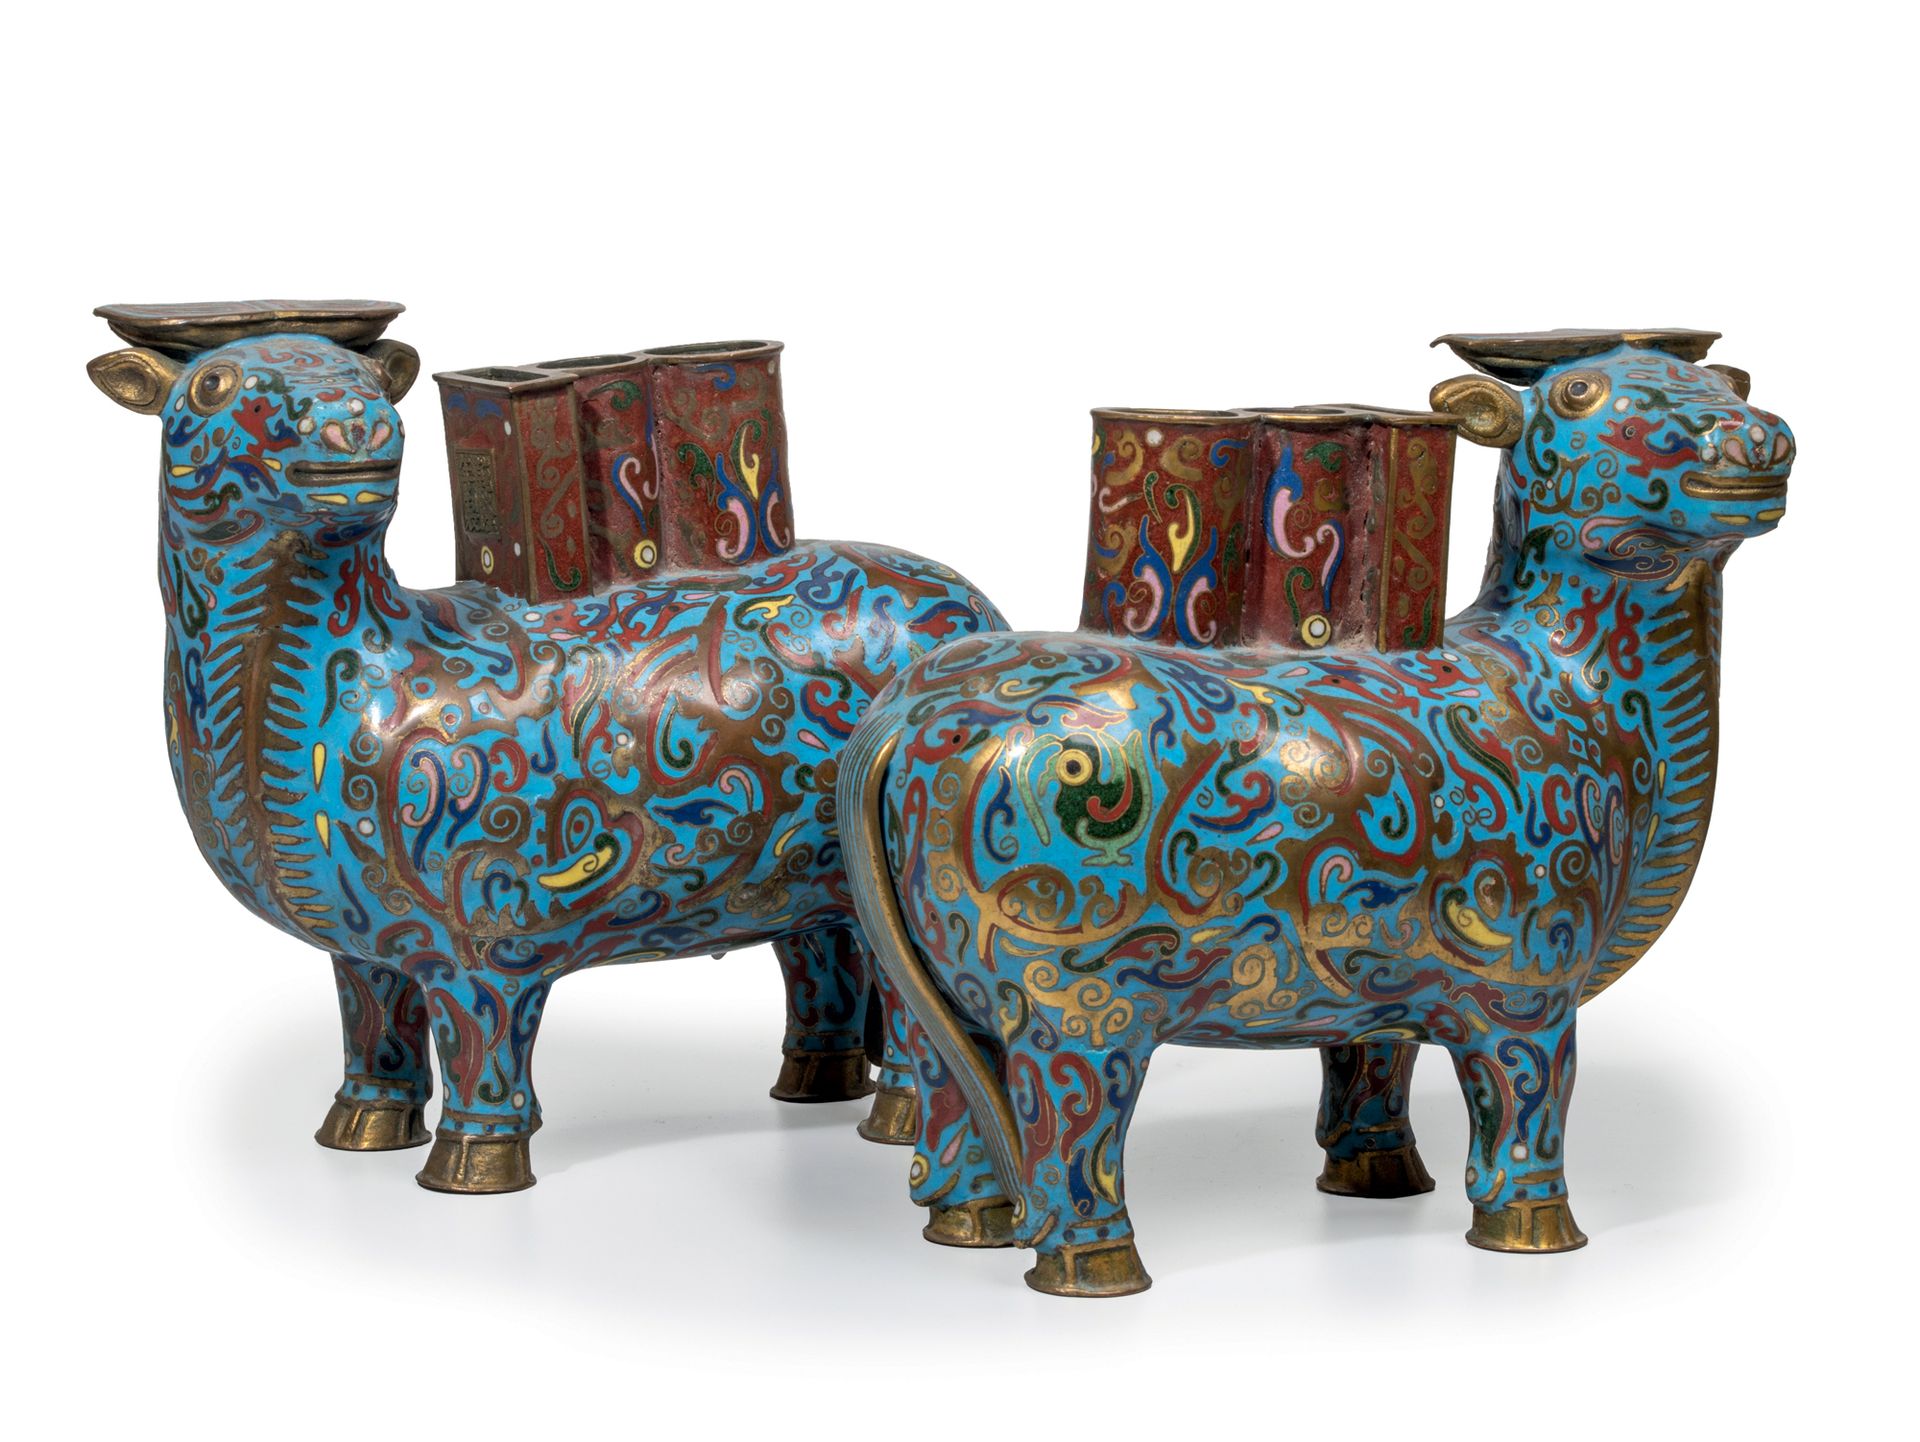 CHINE Pair of buffaloes in cloisonne enamel on copper.
The two animals are desig&hellip;